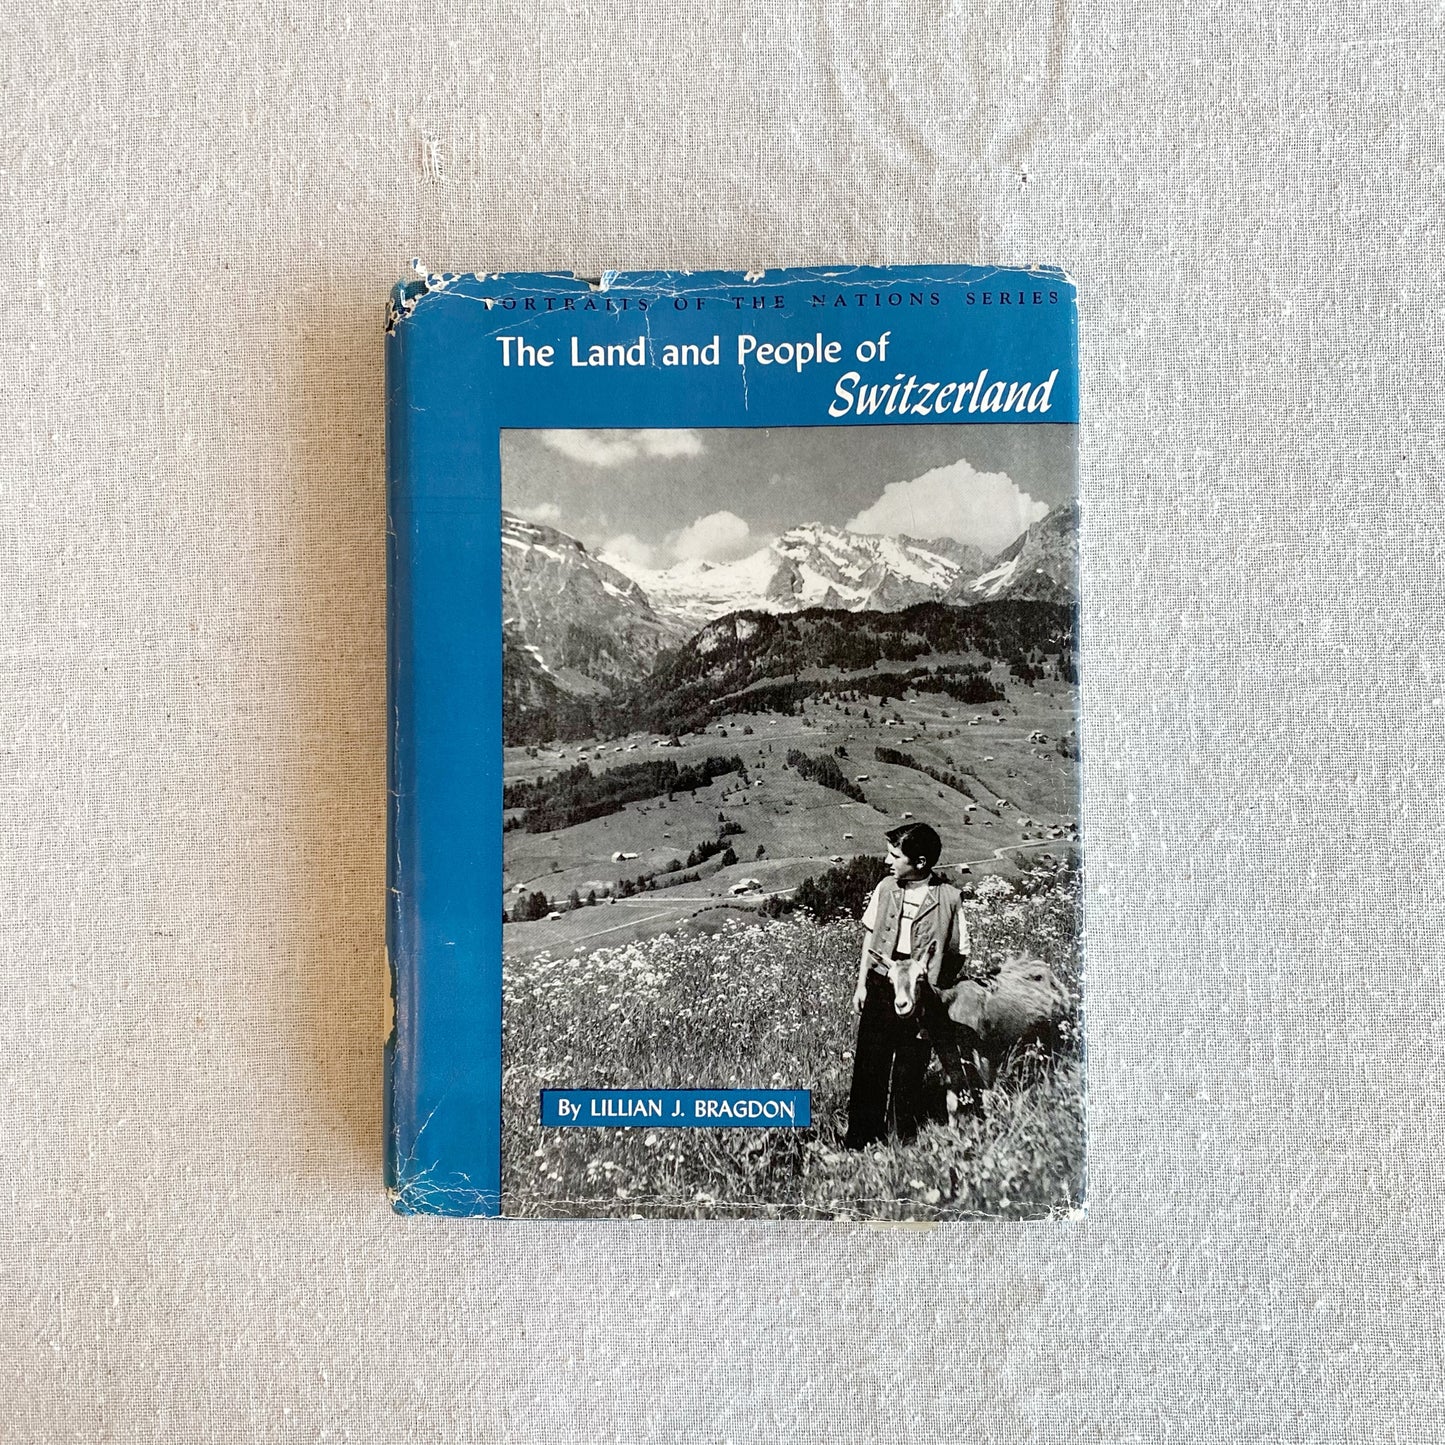 Book: The Land and People of Switzerland